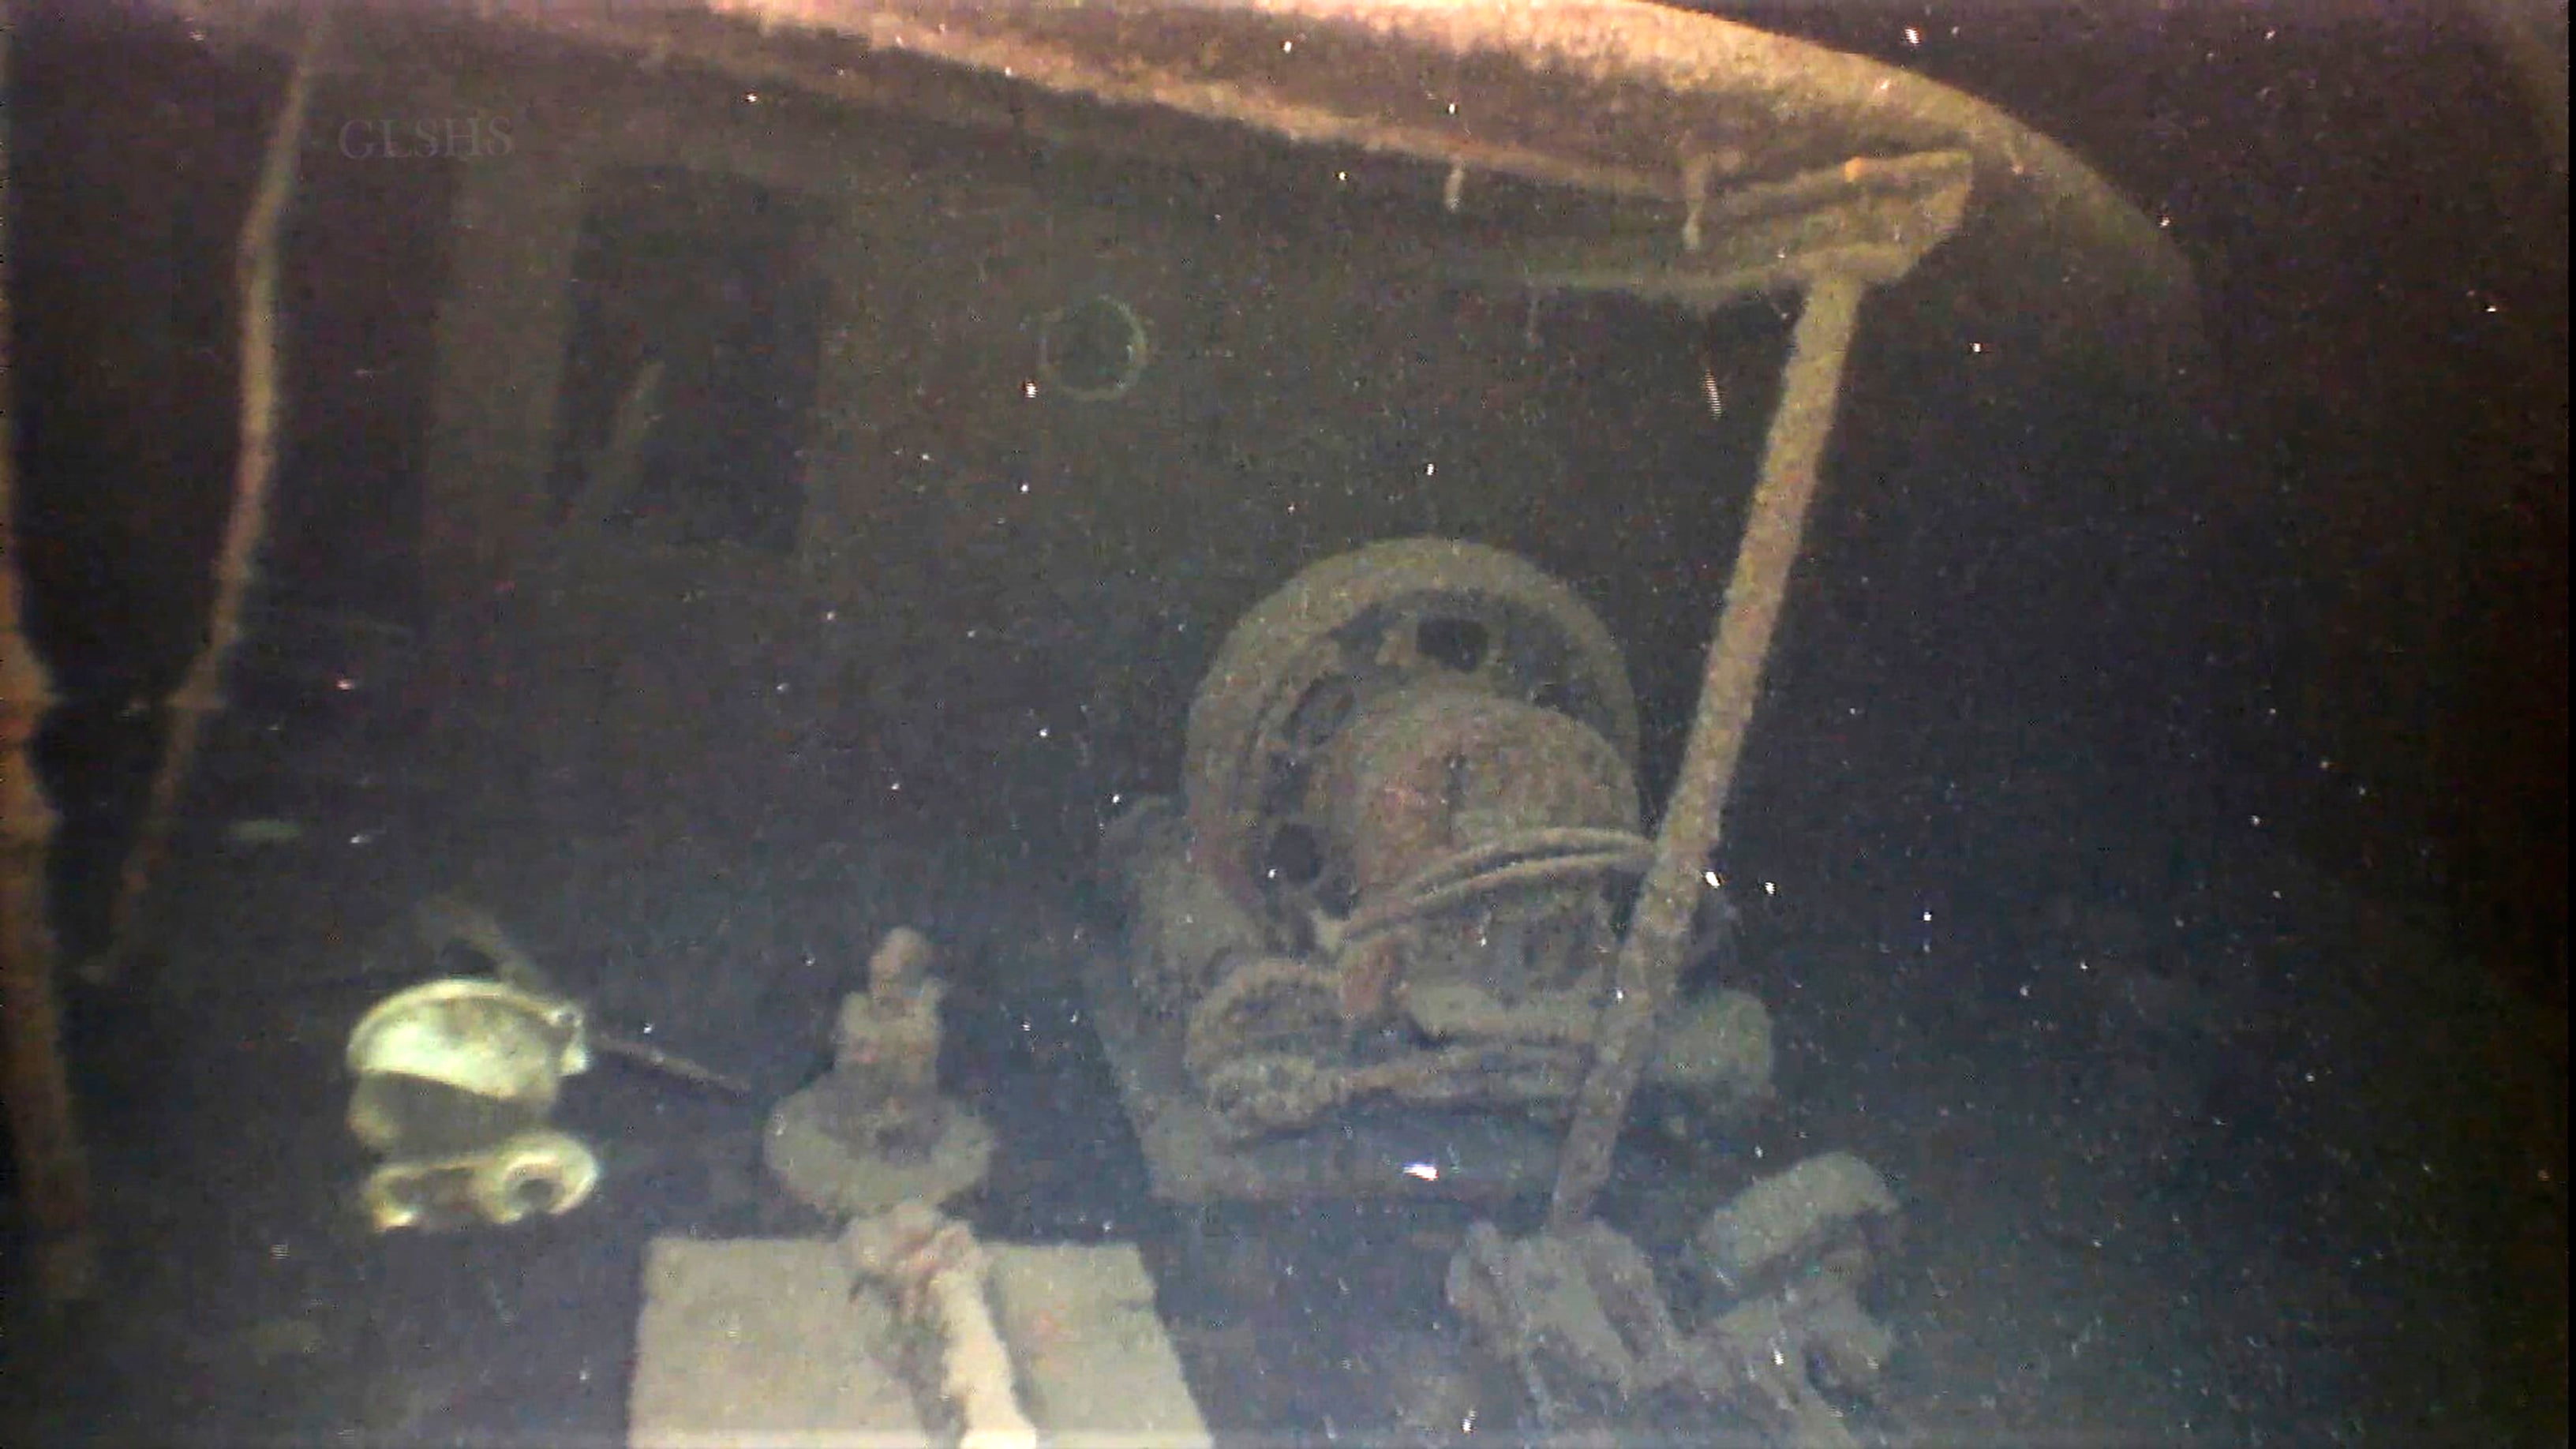 An image from inside the wreck of the bulk carrier ‘Arlington’